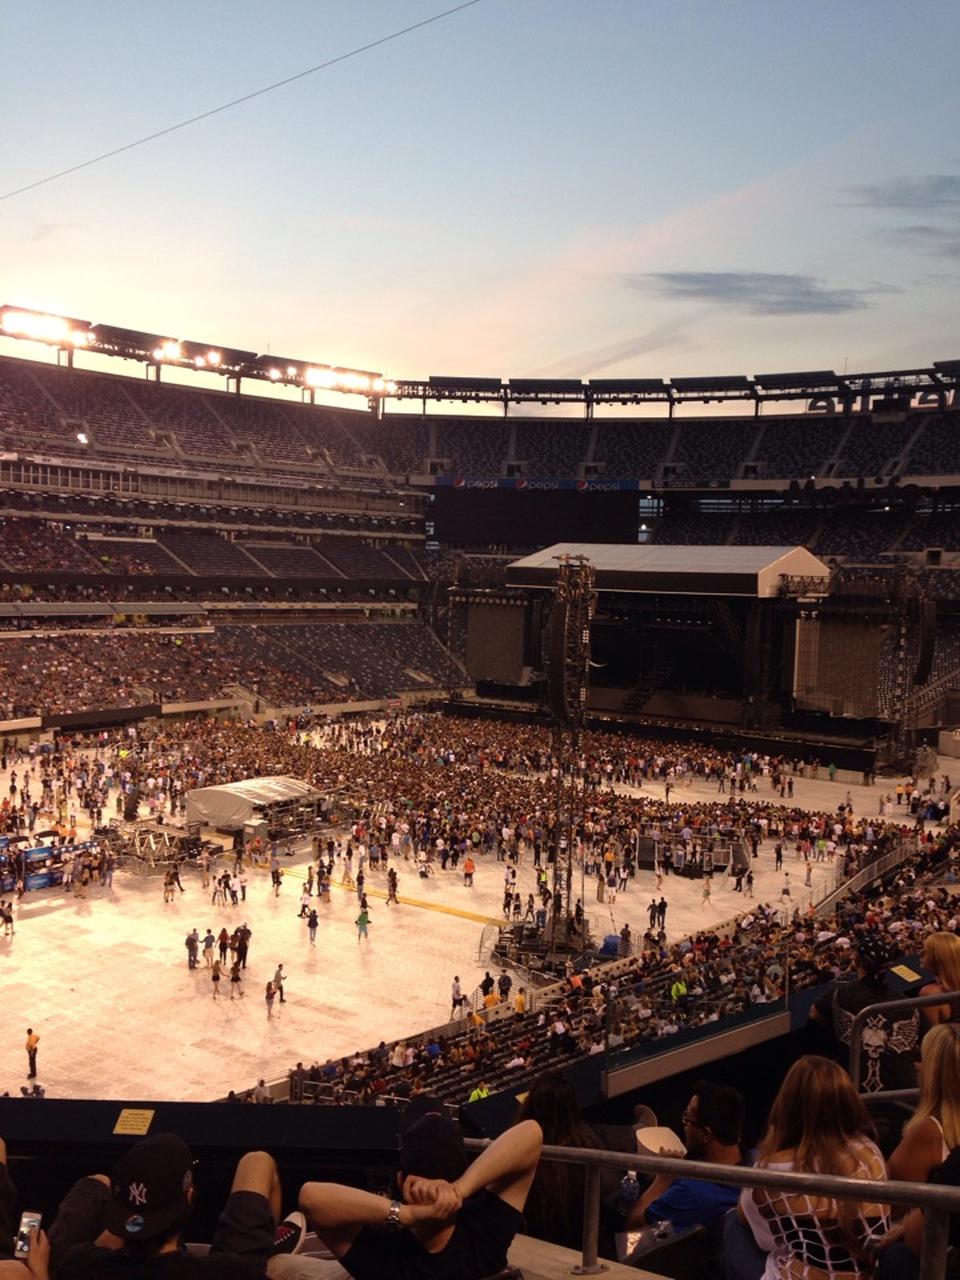 section 220c seat view  for concert - metlife stadium